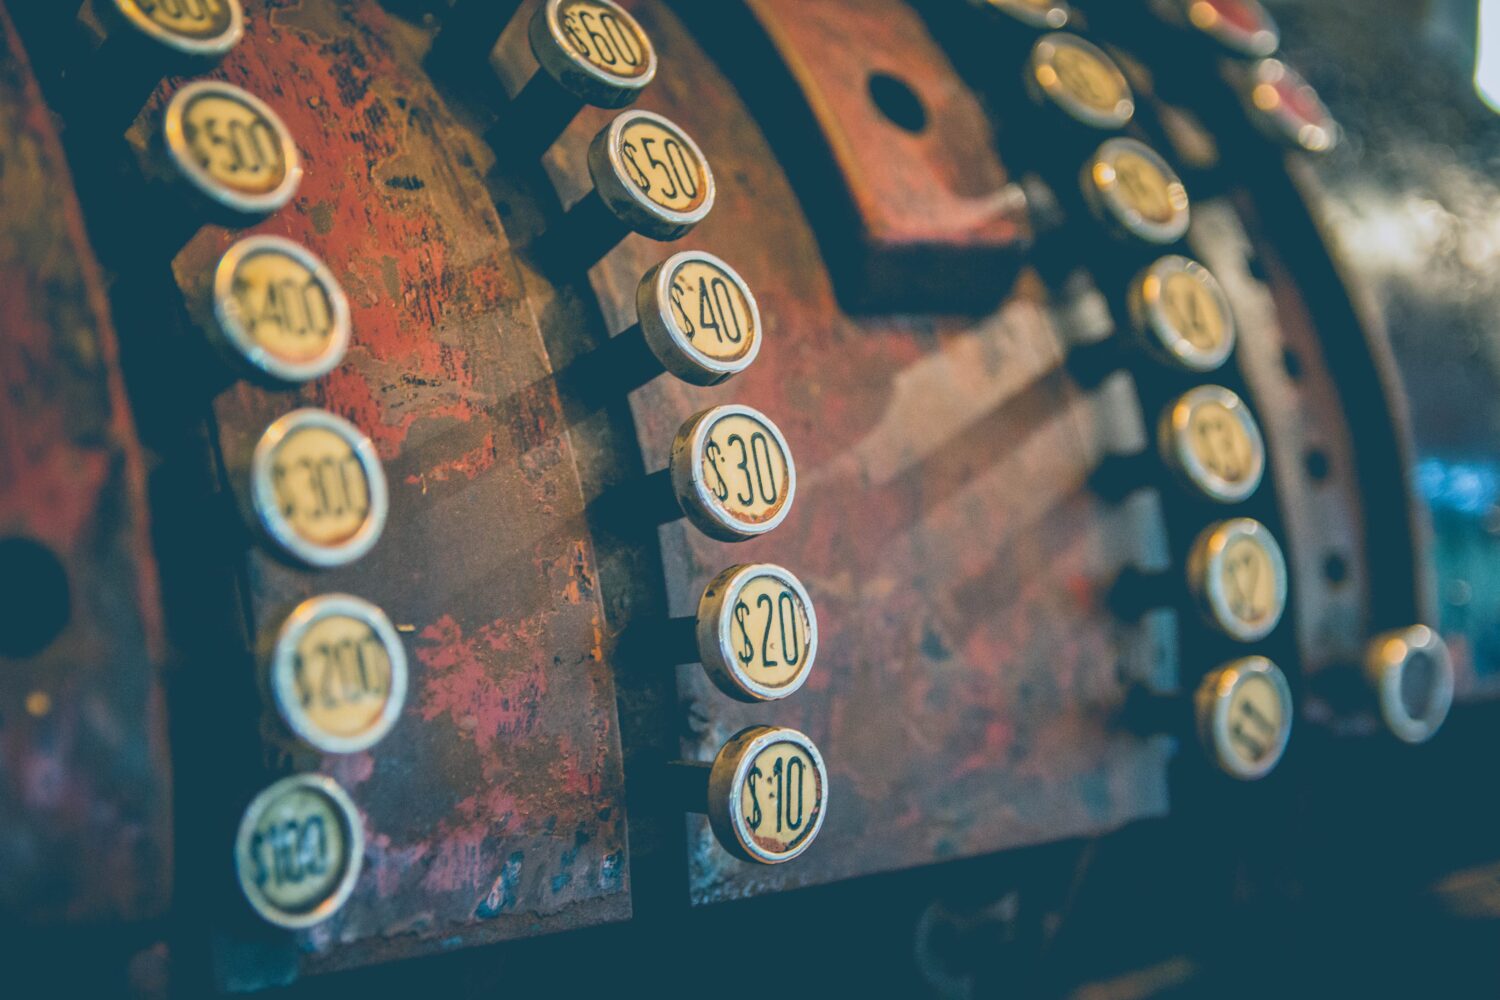 Close-up of antique cash register with circular buttons with dollar amounts.